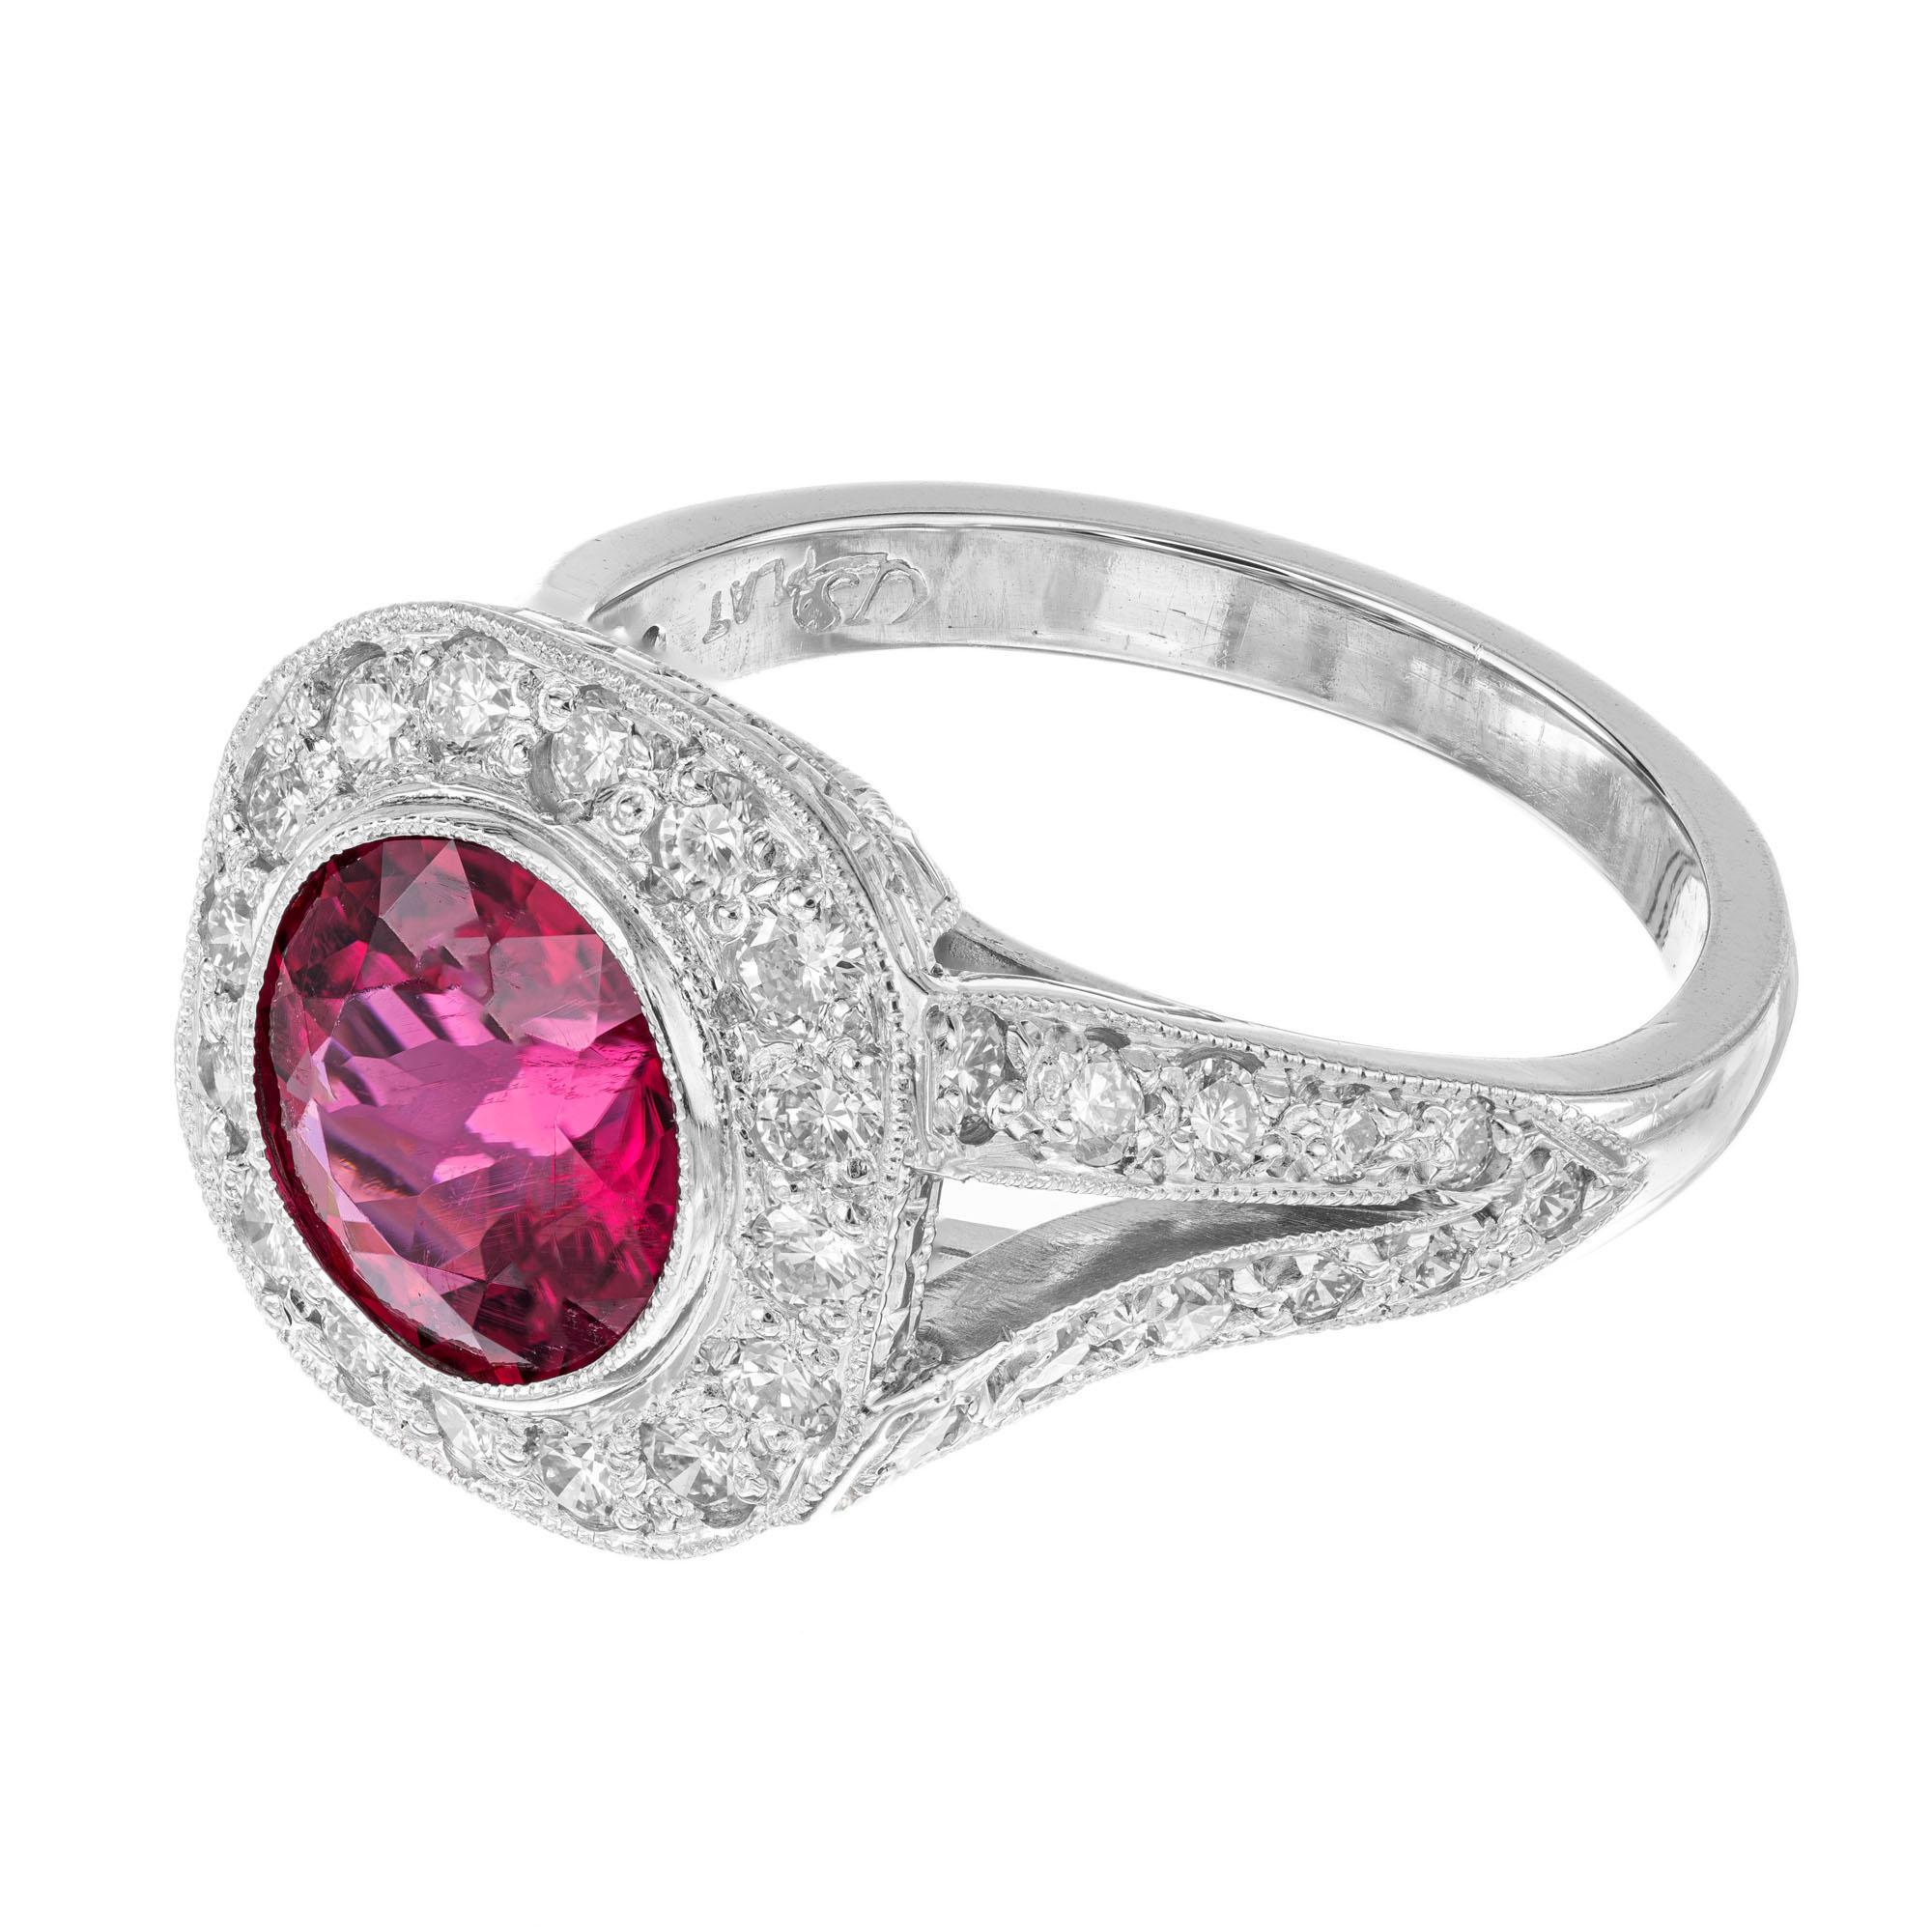 Pink Rubellite natural Gubelin certified round 2.02ct Tourmaline and diamond engagement ring. Gubelin certified center round pink tourmaline in a platinum diamond split and halo setting. The stone is from an estate circa 1930. 

1 round red pink